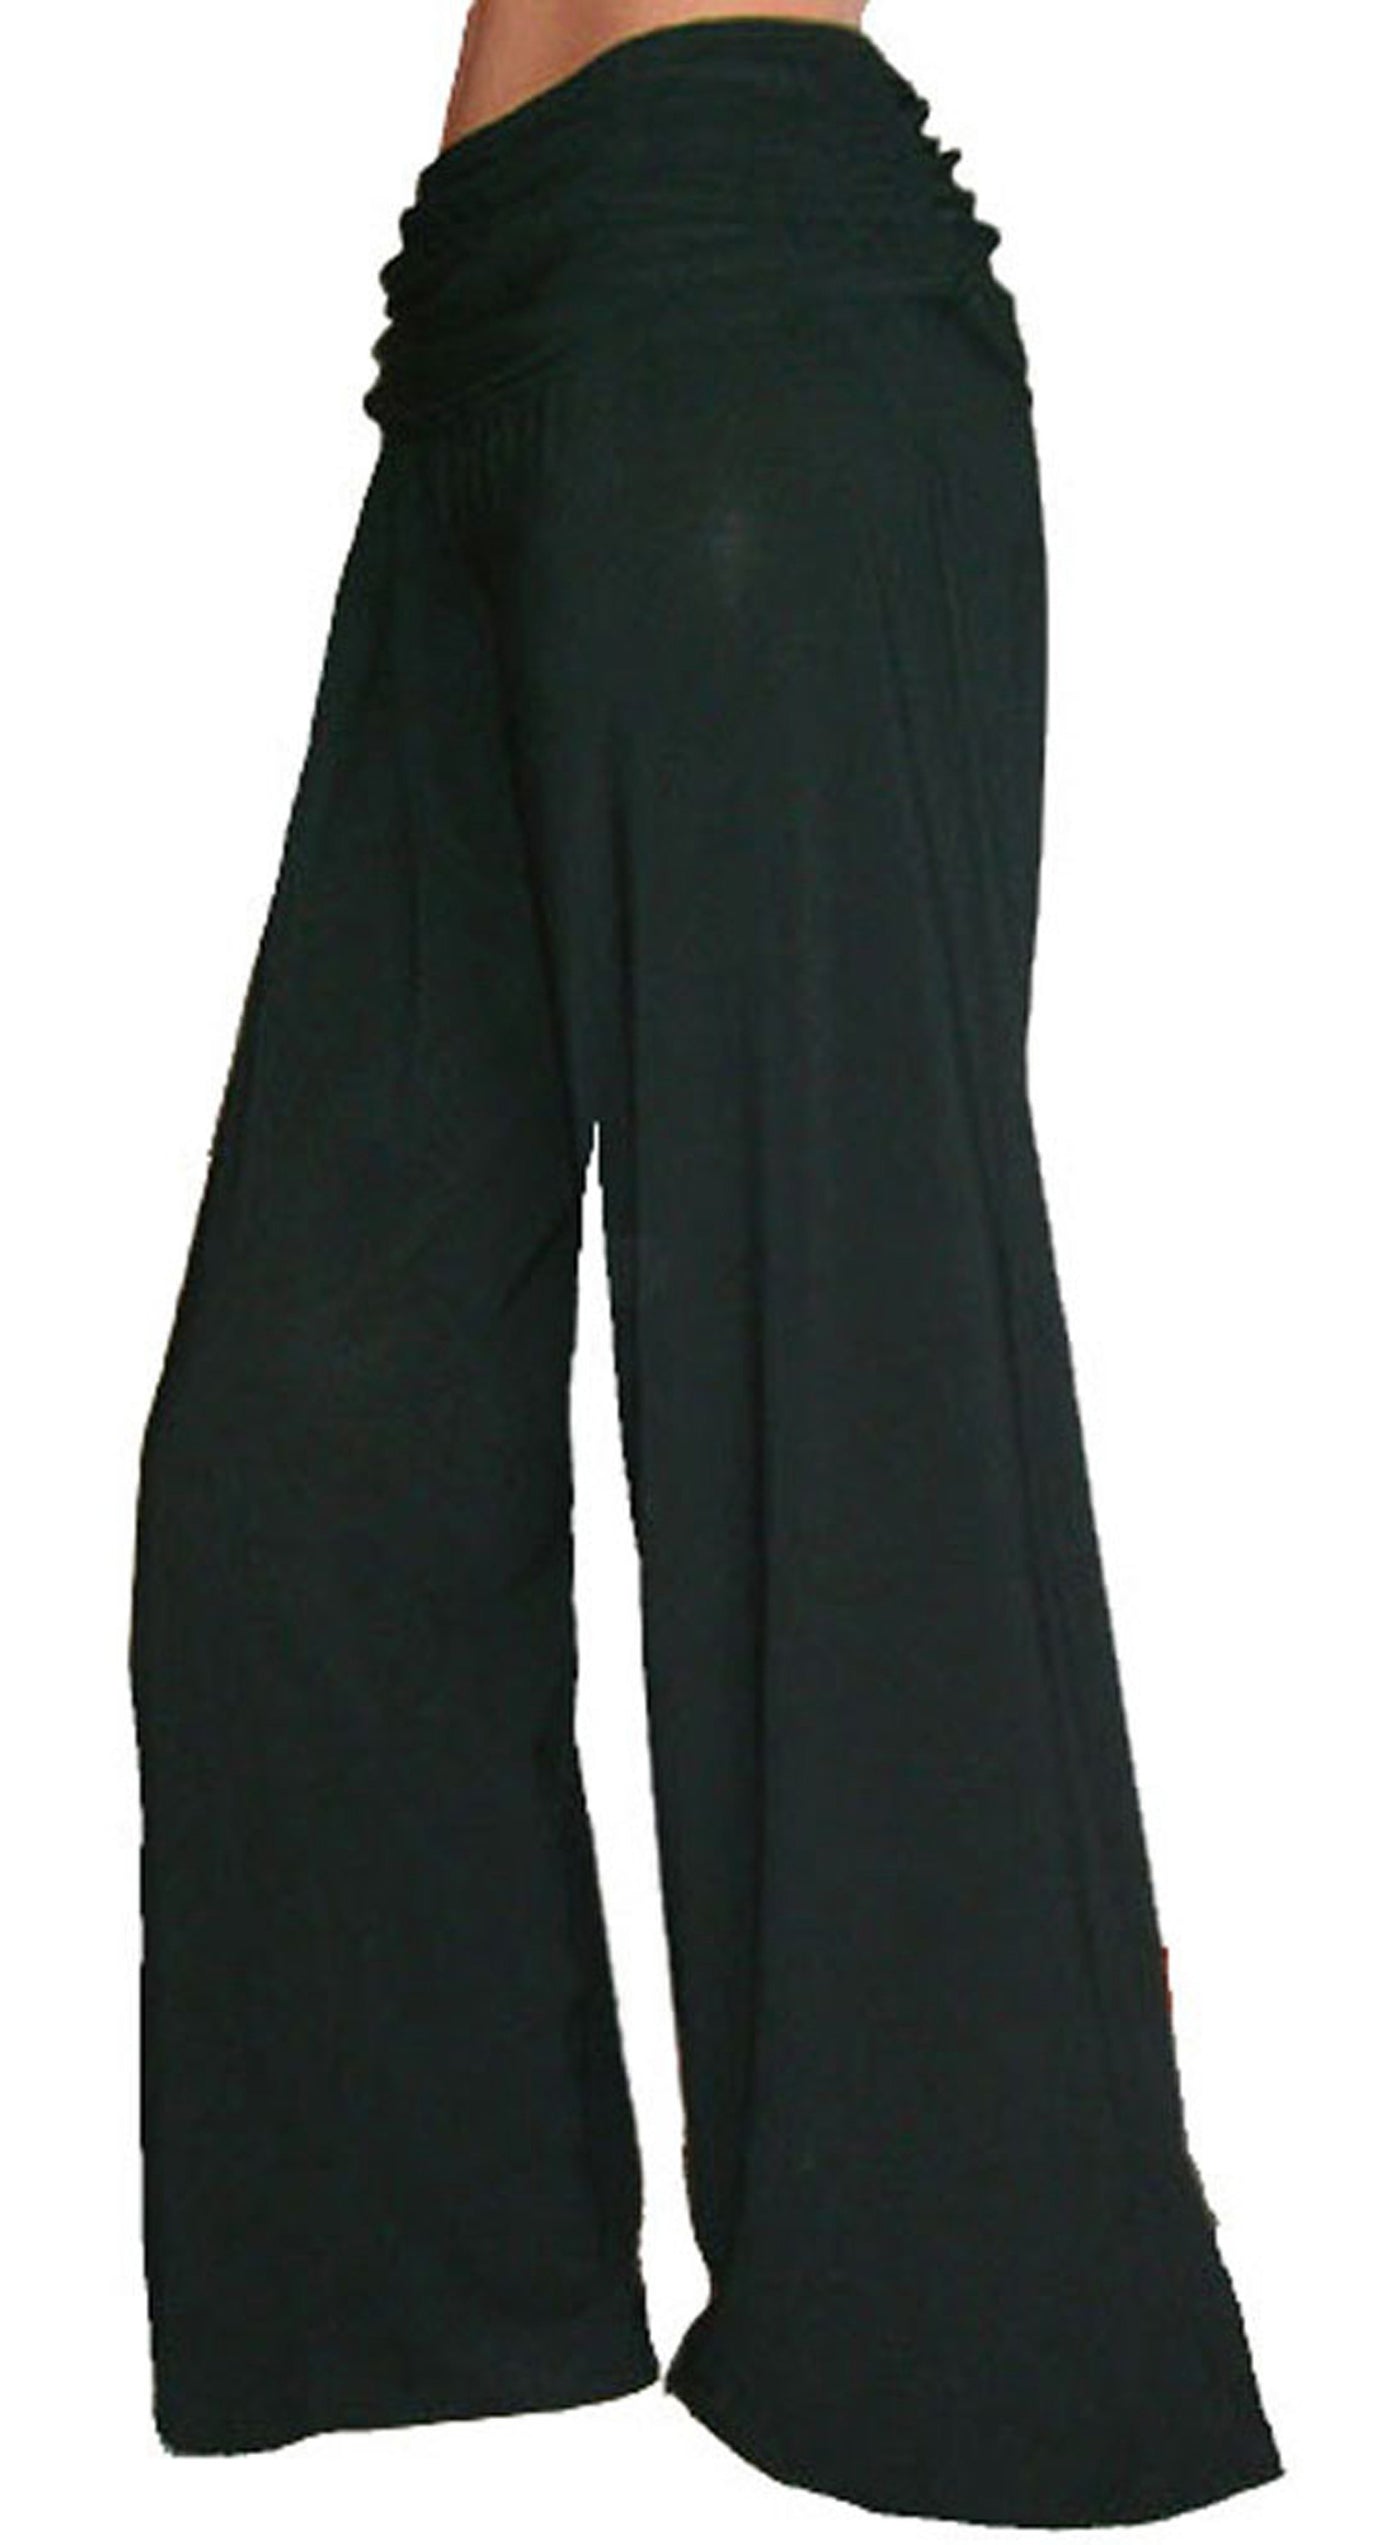 Plus Size Pants | Slimming Gaucho | Made In USA | Funfash